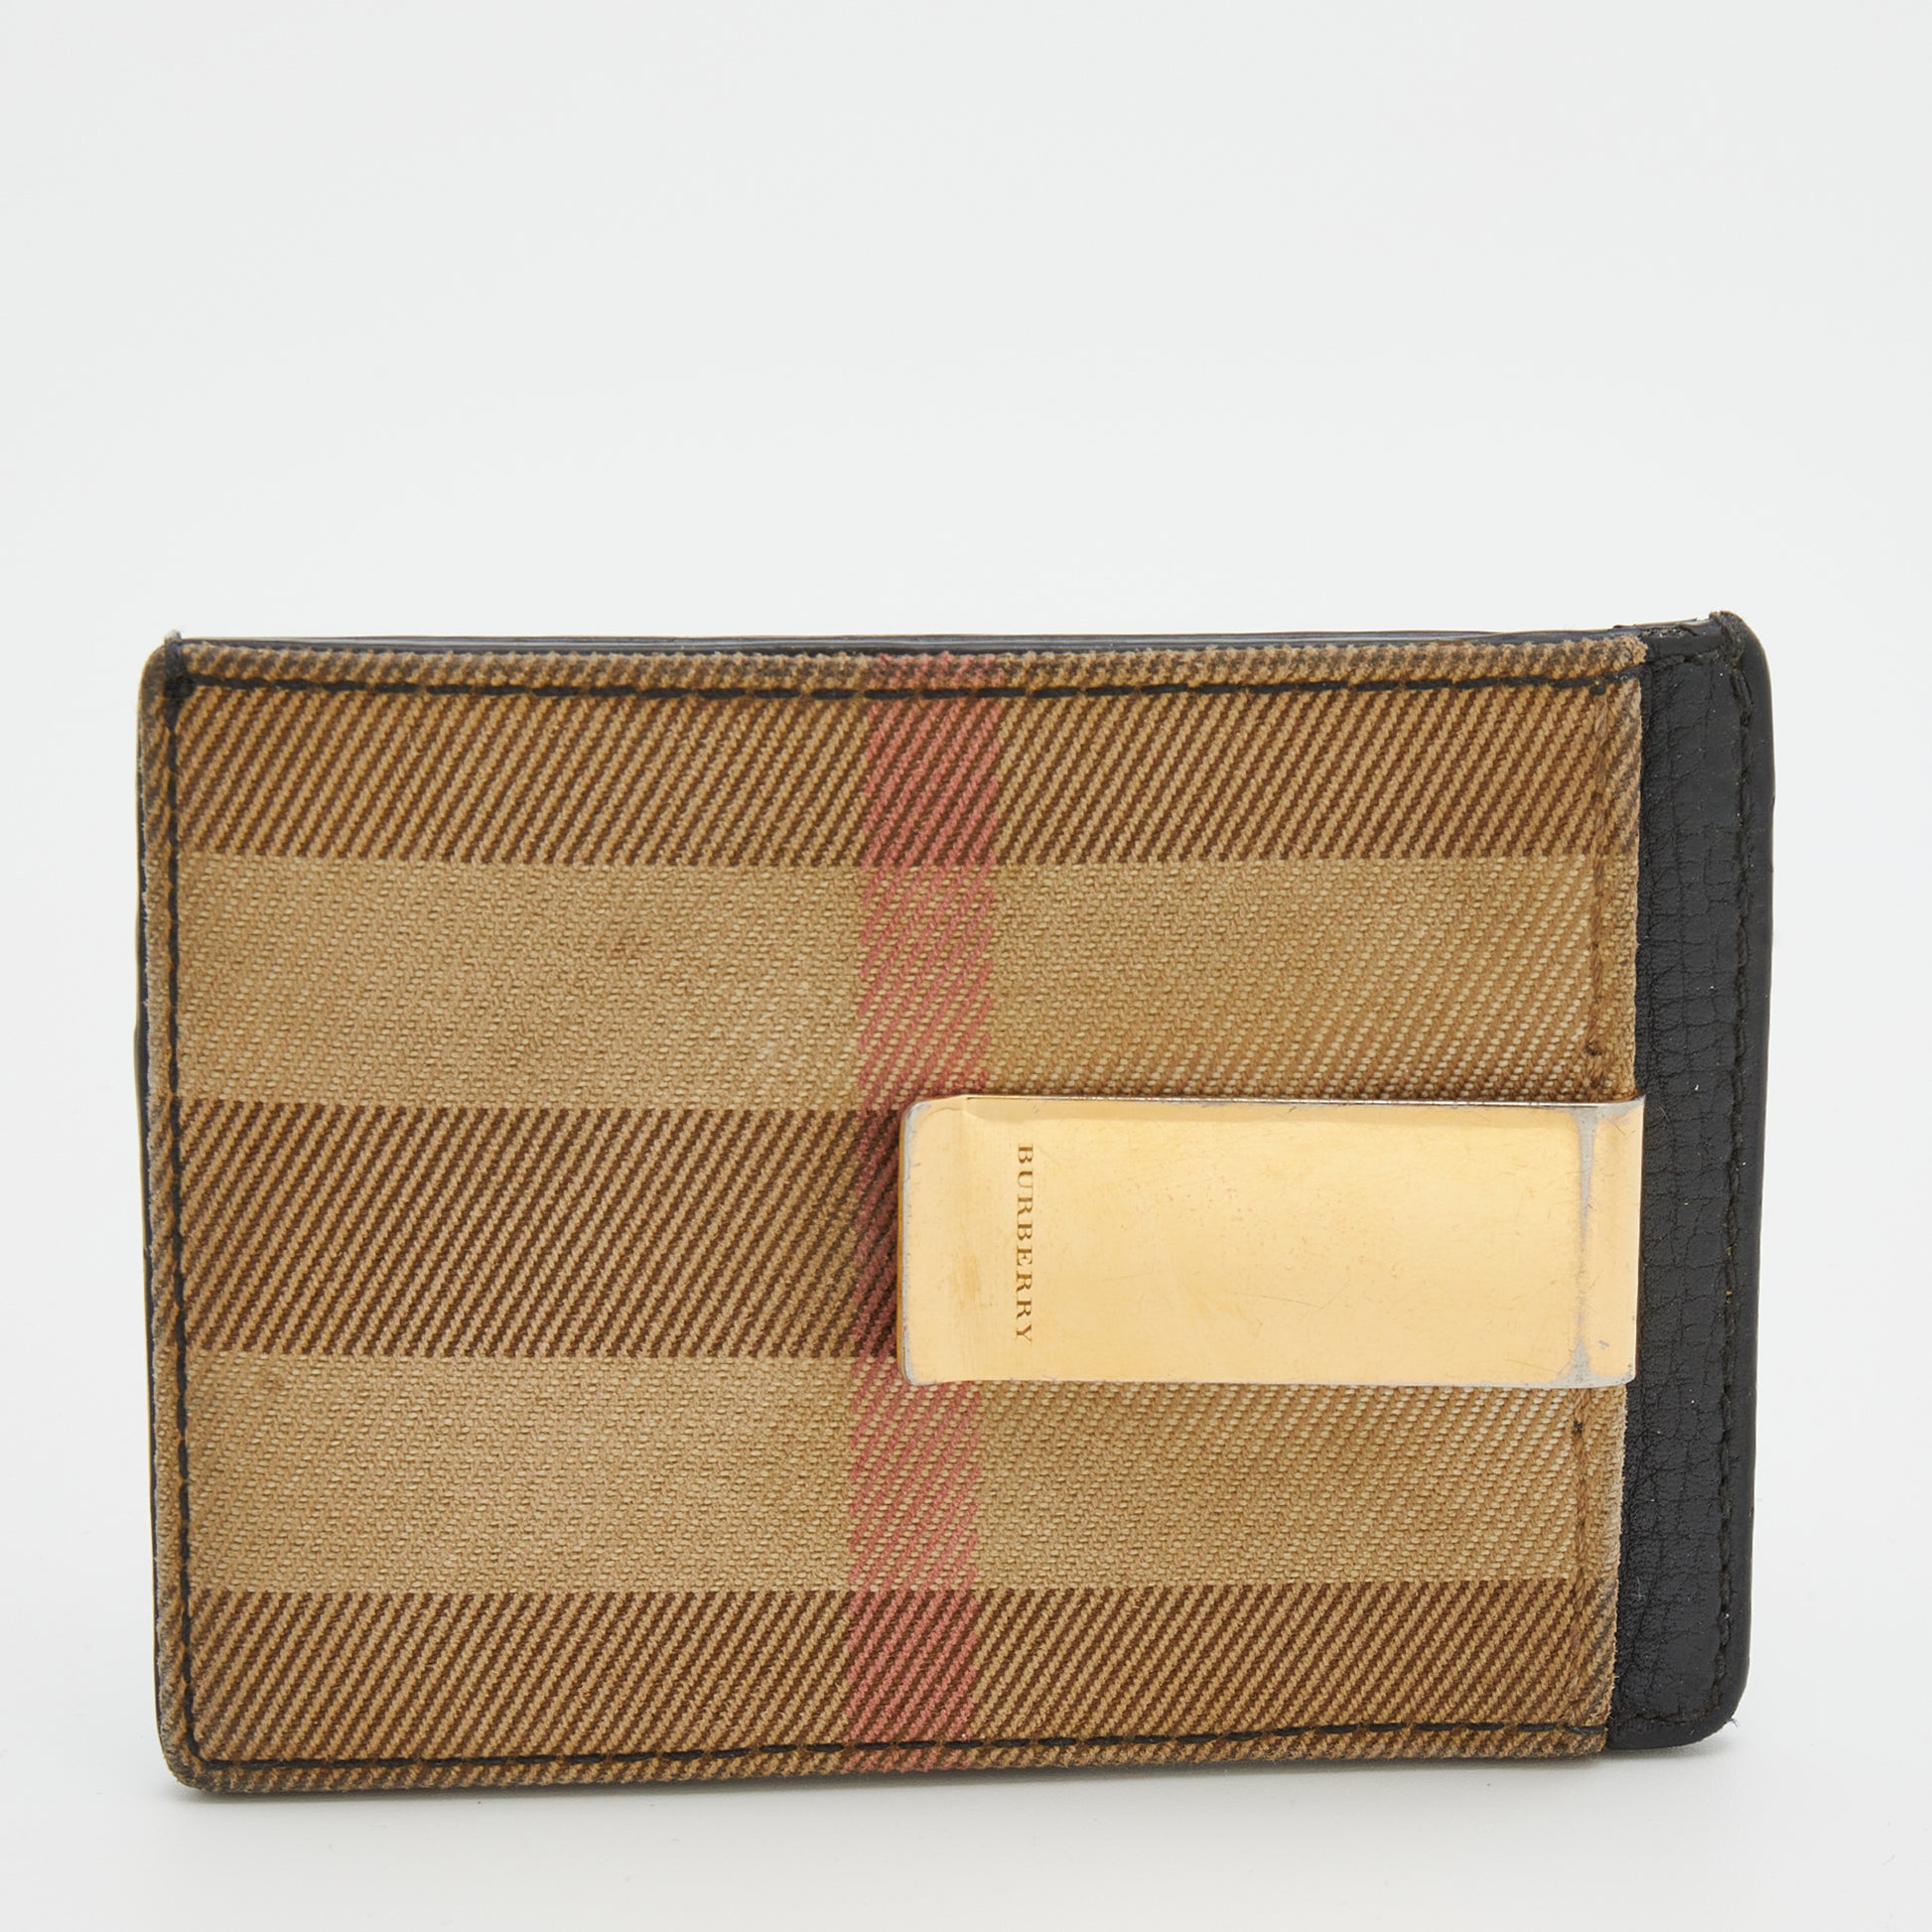 Burberry Black/Beige Leather And Vintage Canvas Check Money Clip Walle